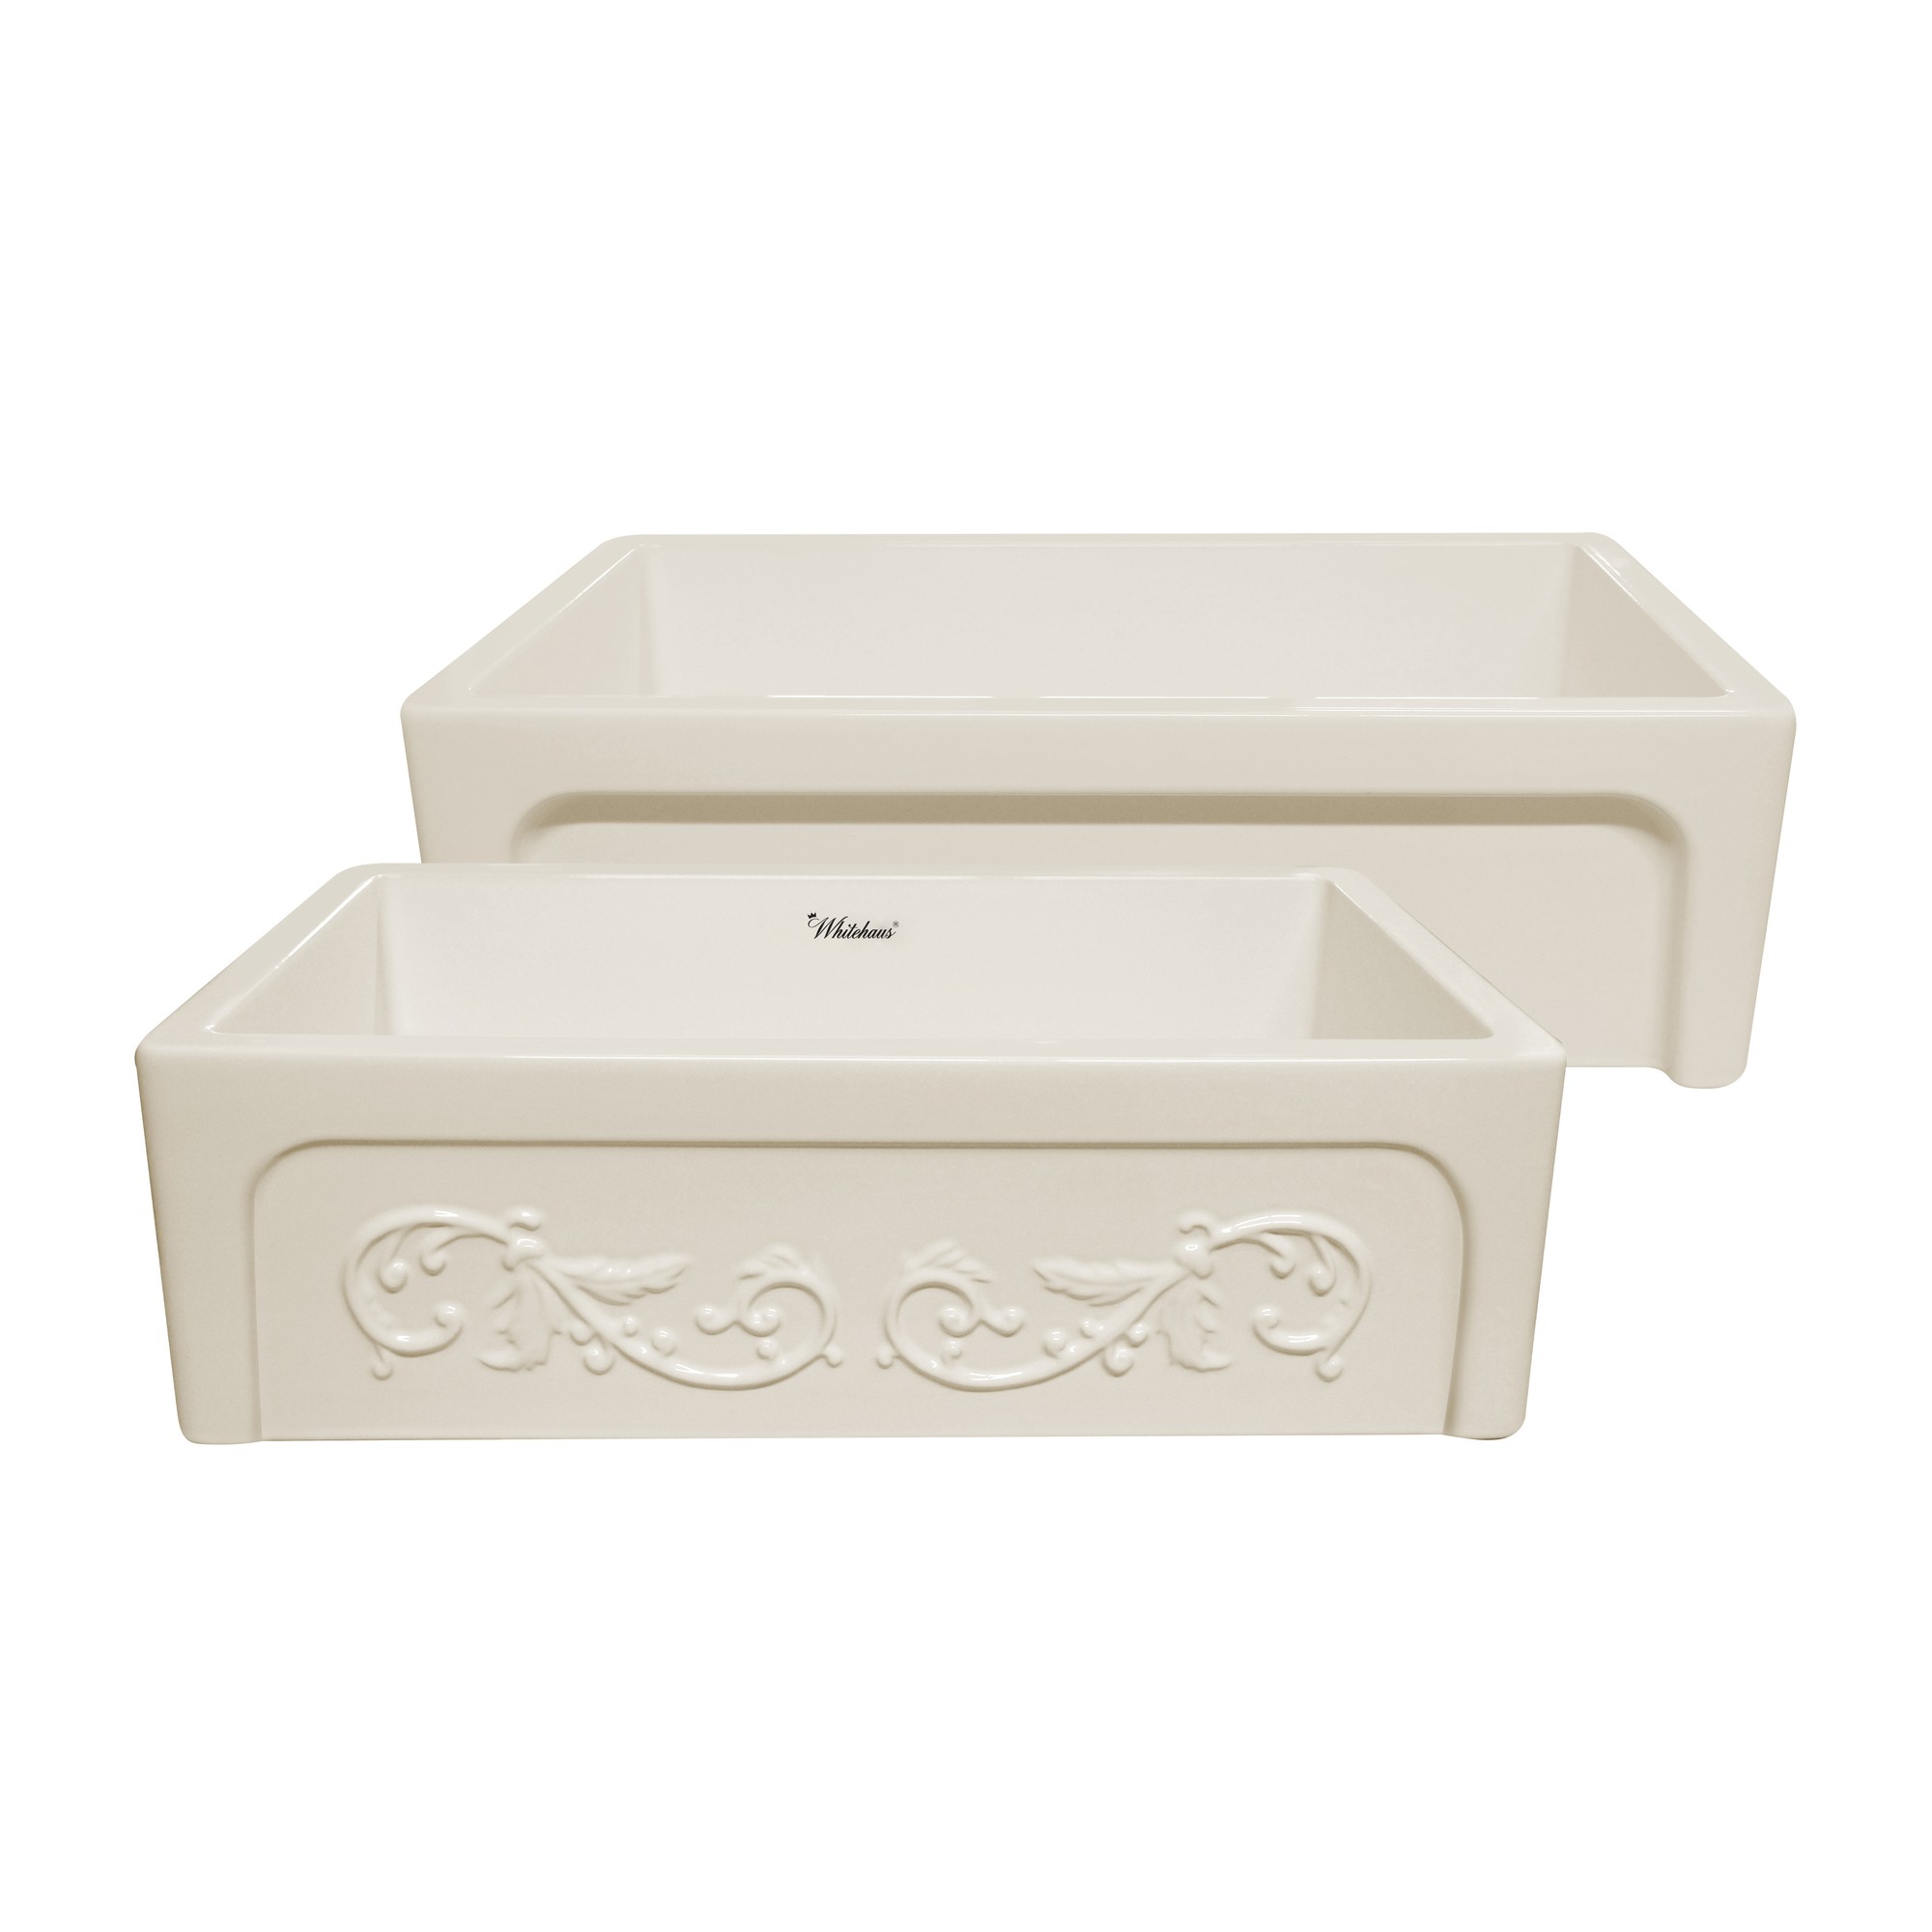 Glencove St. Ives 33" Front Apron Fireclay Sink with an Intricate Vine Design on one side and an Elegant Plain Beveled Front Apr